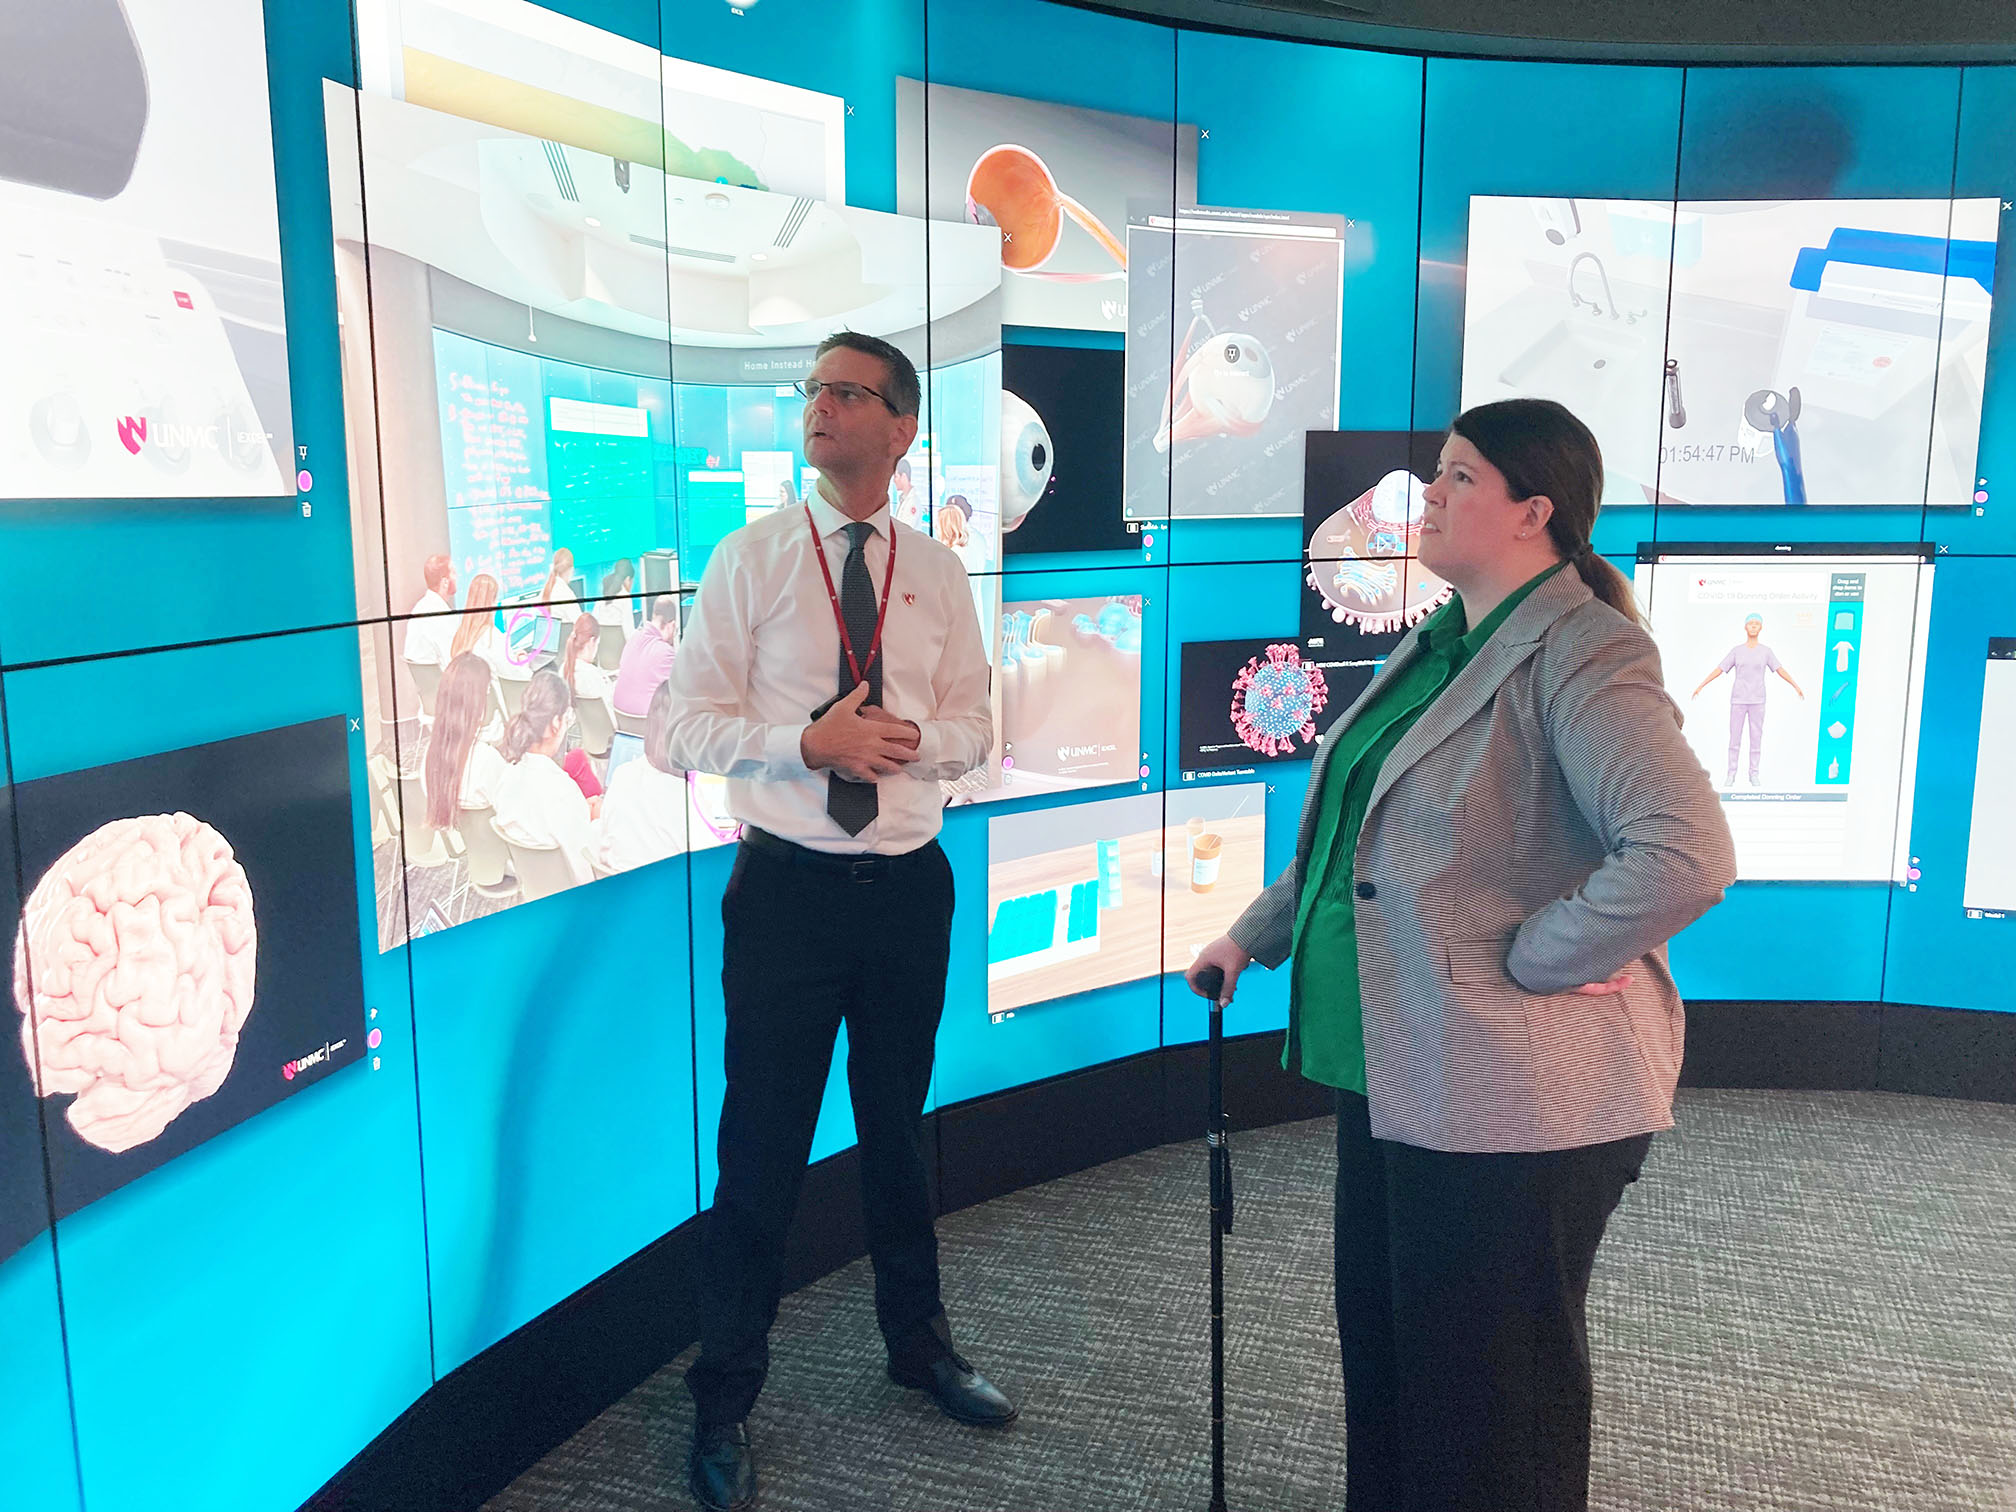 Ben Stobbe&comma; assistant vice chancellor of clinical simulation for iEXCEL&comma; led a tour of the Davis Global Center with Melanie Lazarus&comma; EdD&comma; dean of the U&period;S&period; Air Force School of Aerospace Medicine&period;